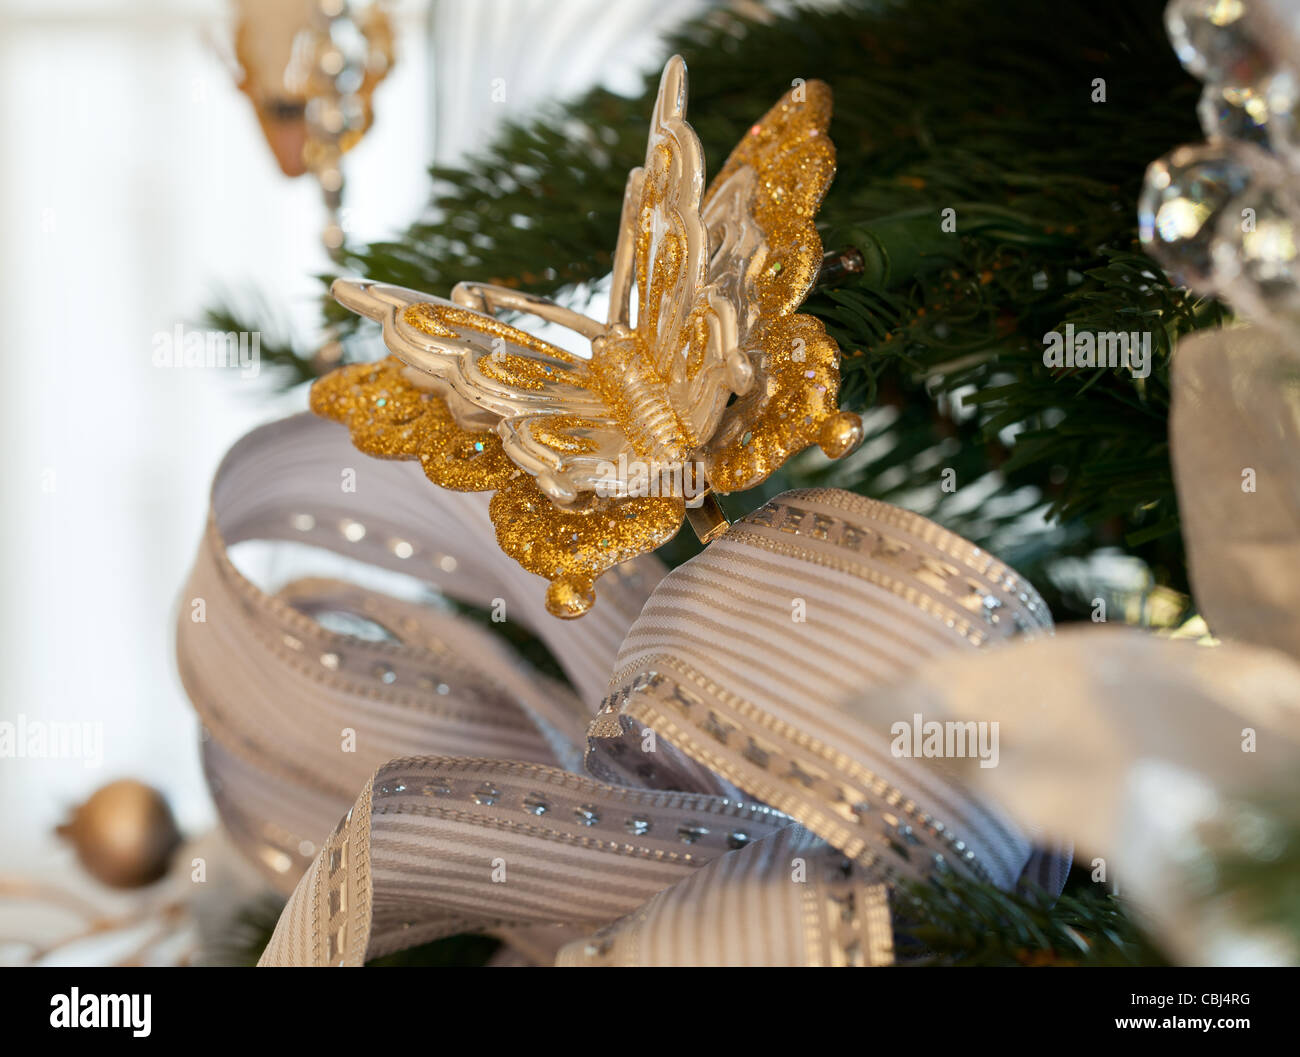 https://c8.alamy.com/comp/CBJ4RG/christmas-tree-decorated-with-silver-and-white-ribbons-and-butterfly-CBJ4RG.jpg